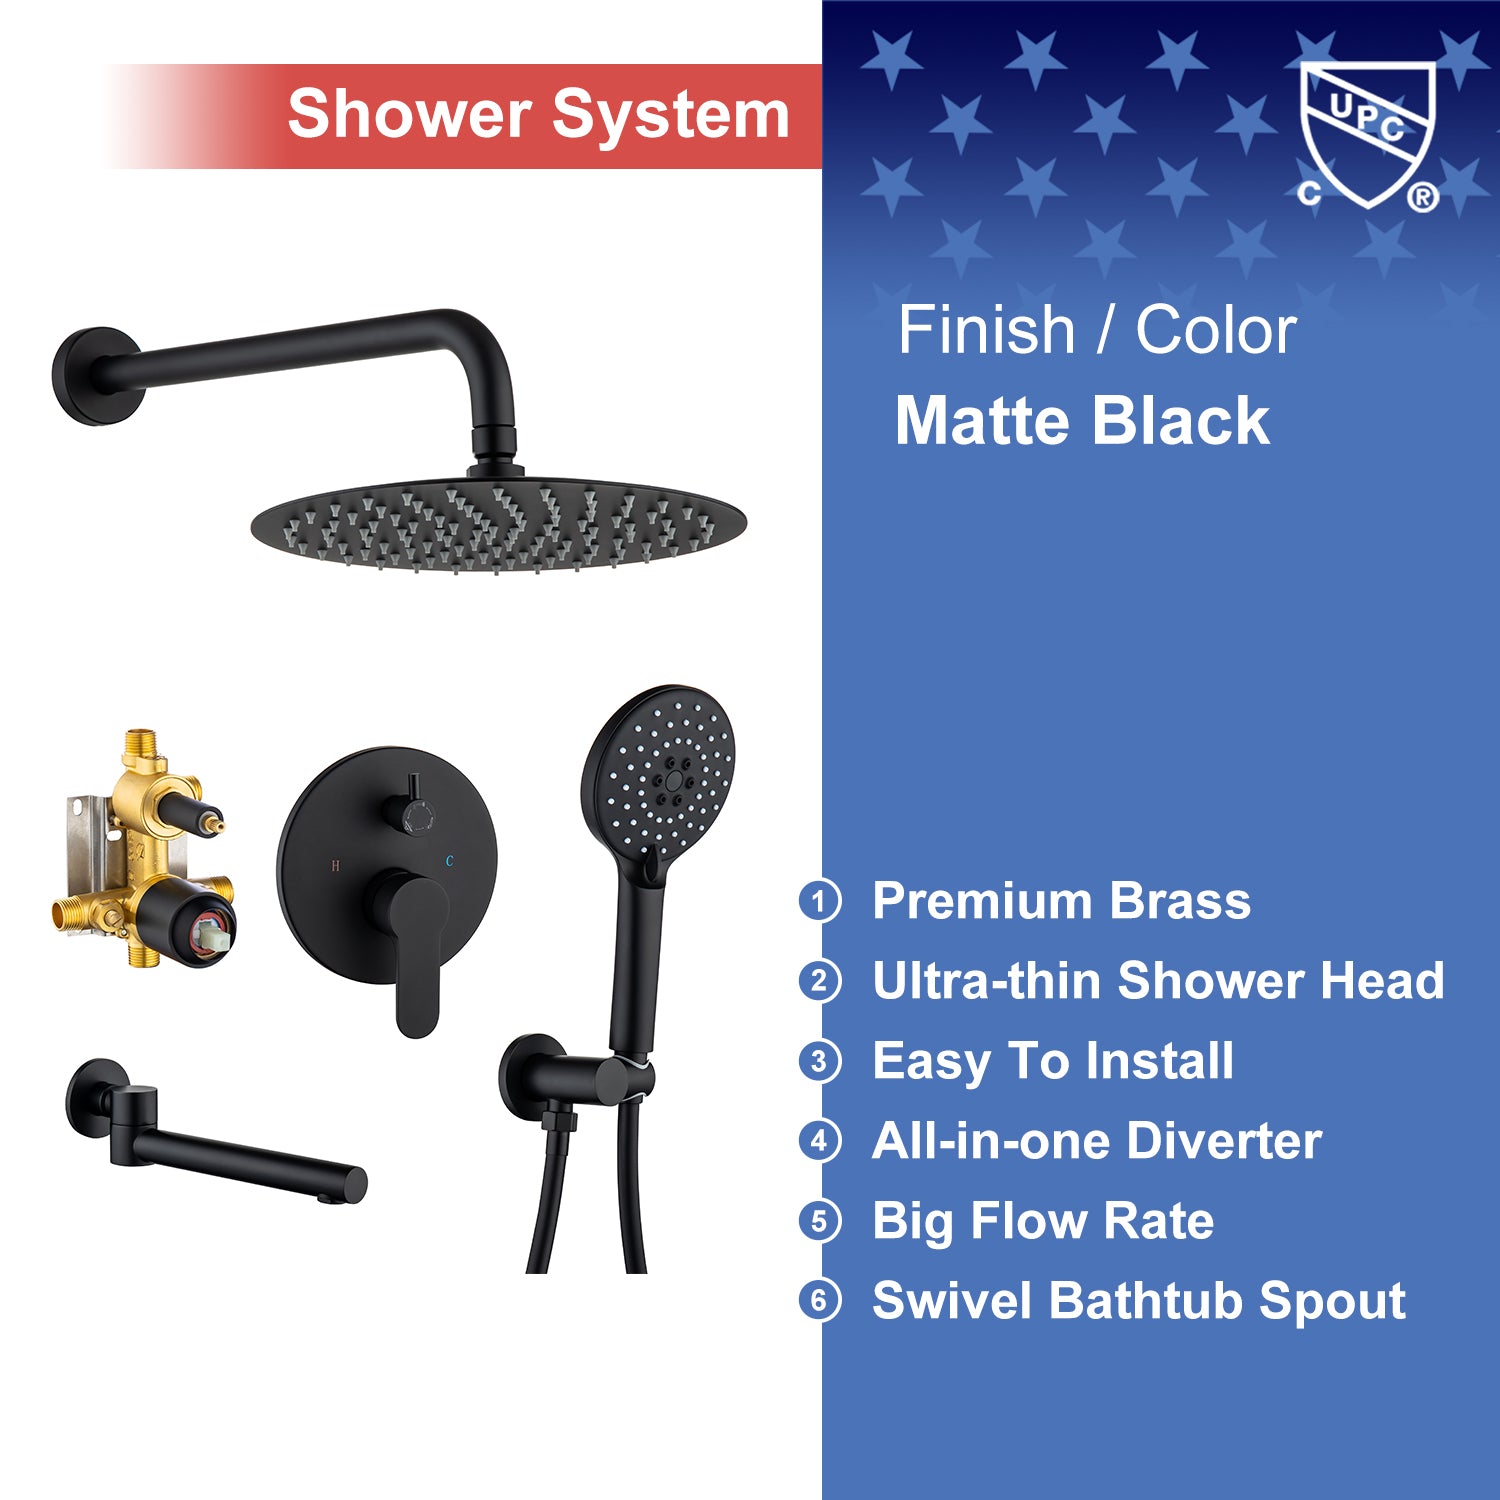 10" Shower Head 3-way Wall-Mount Round Shower Faucet with Rough-in Valve RX96203-10